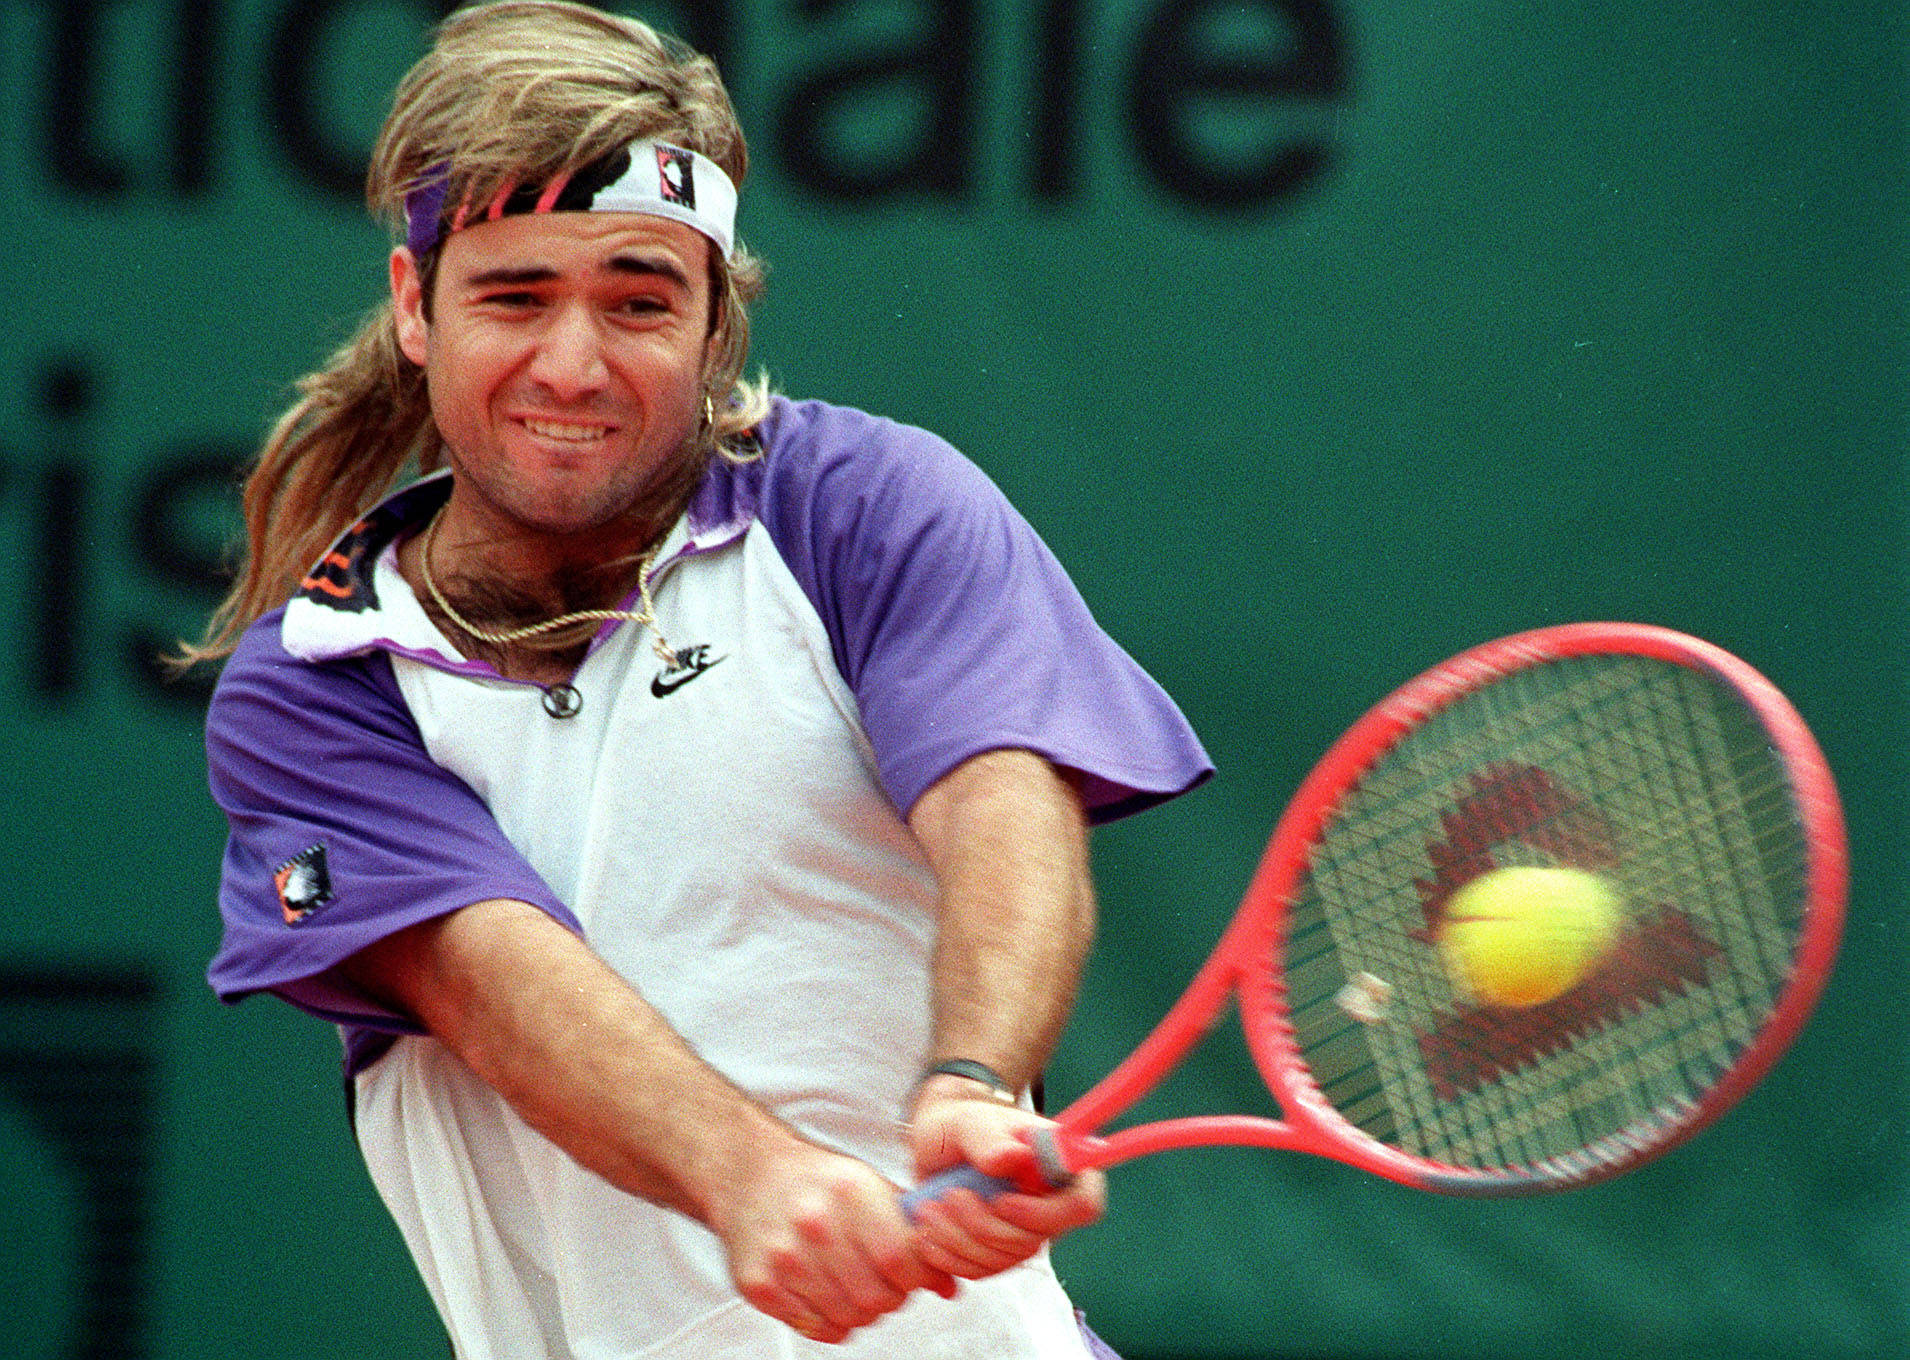 Andre Agassi's Powerful Backhand Stroke Wallpaper